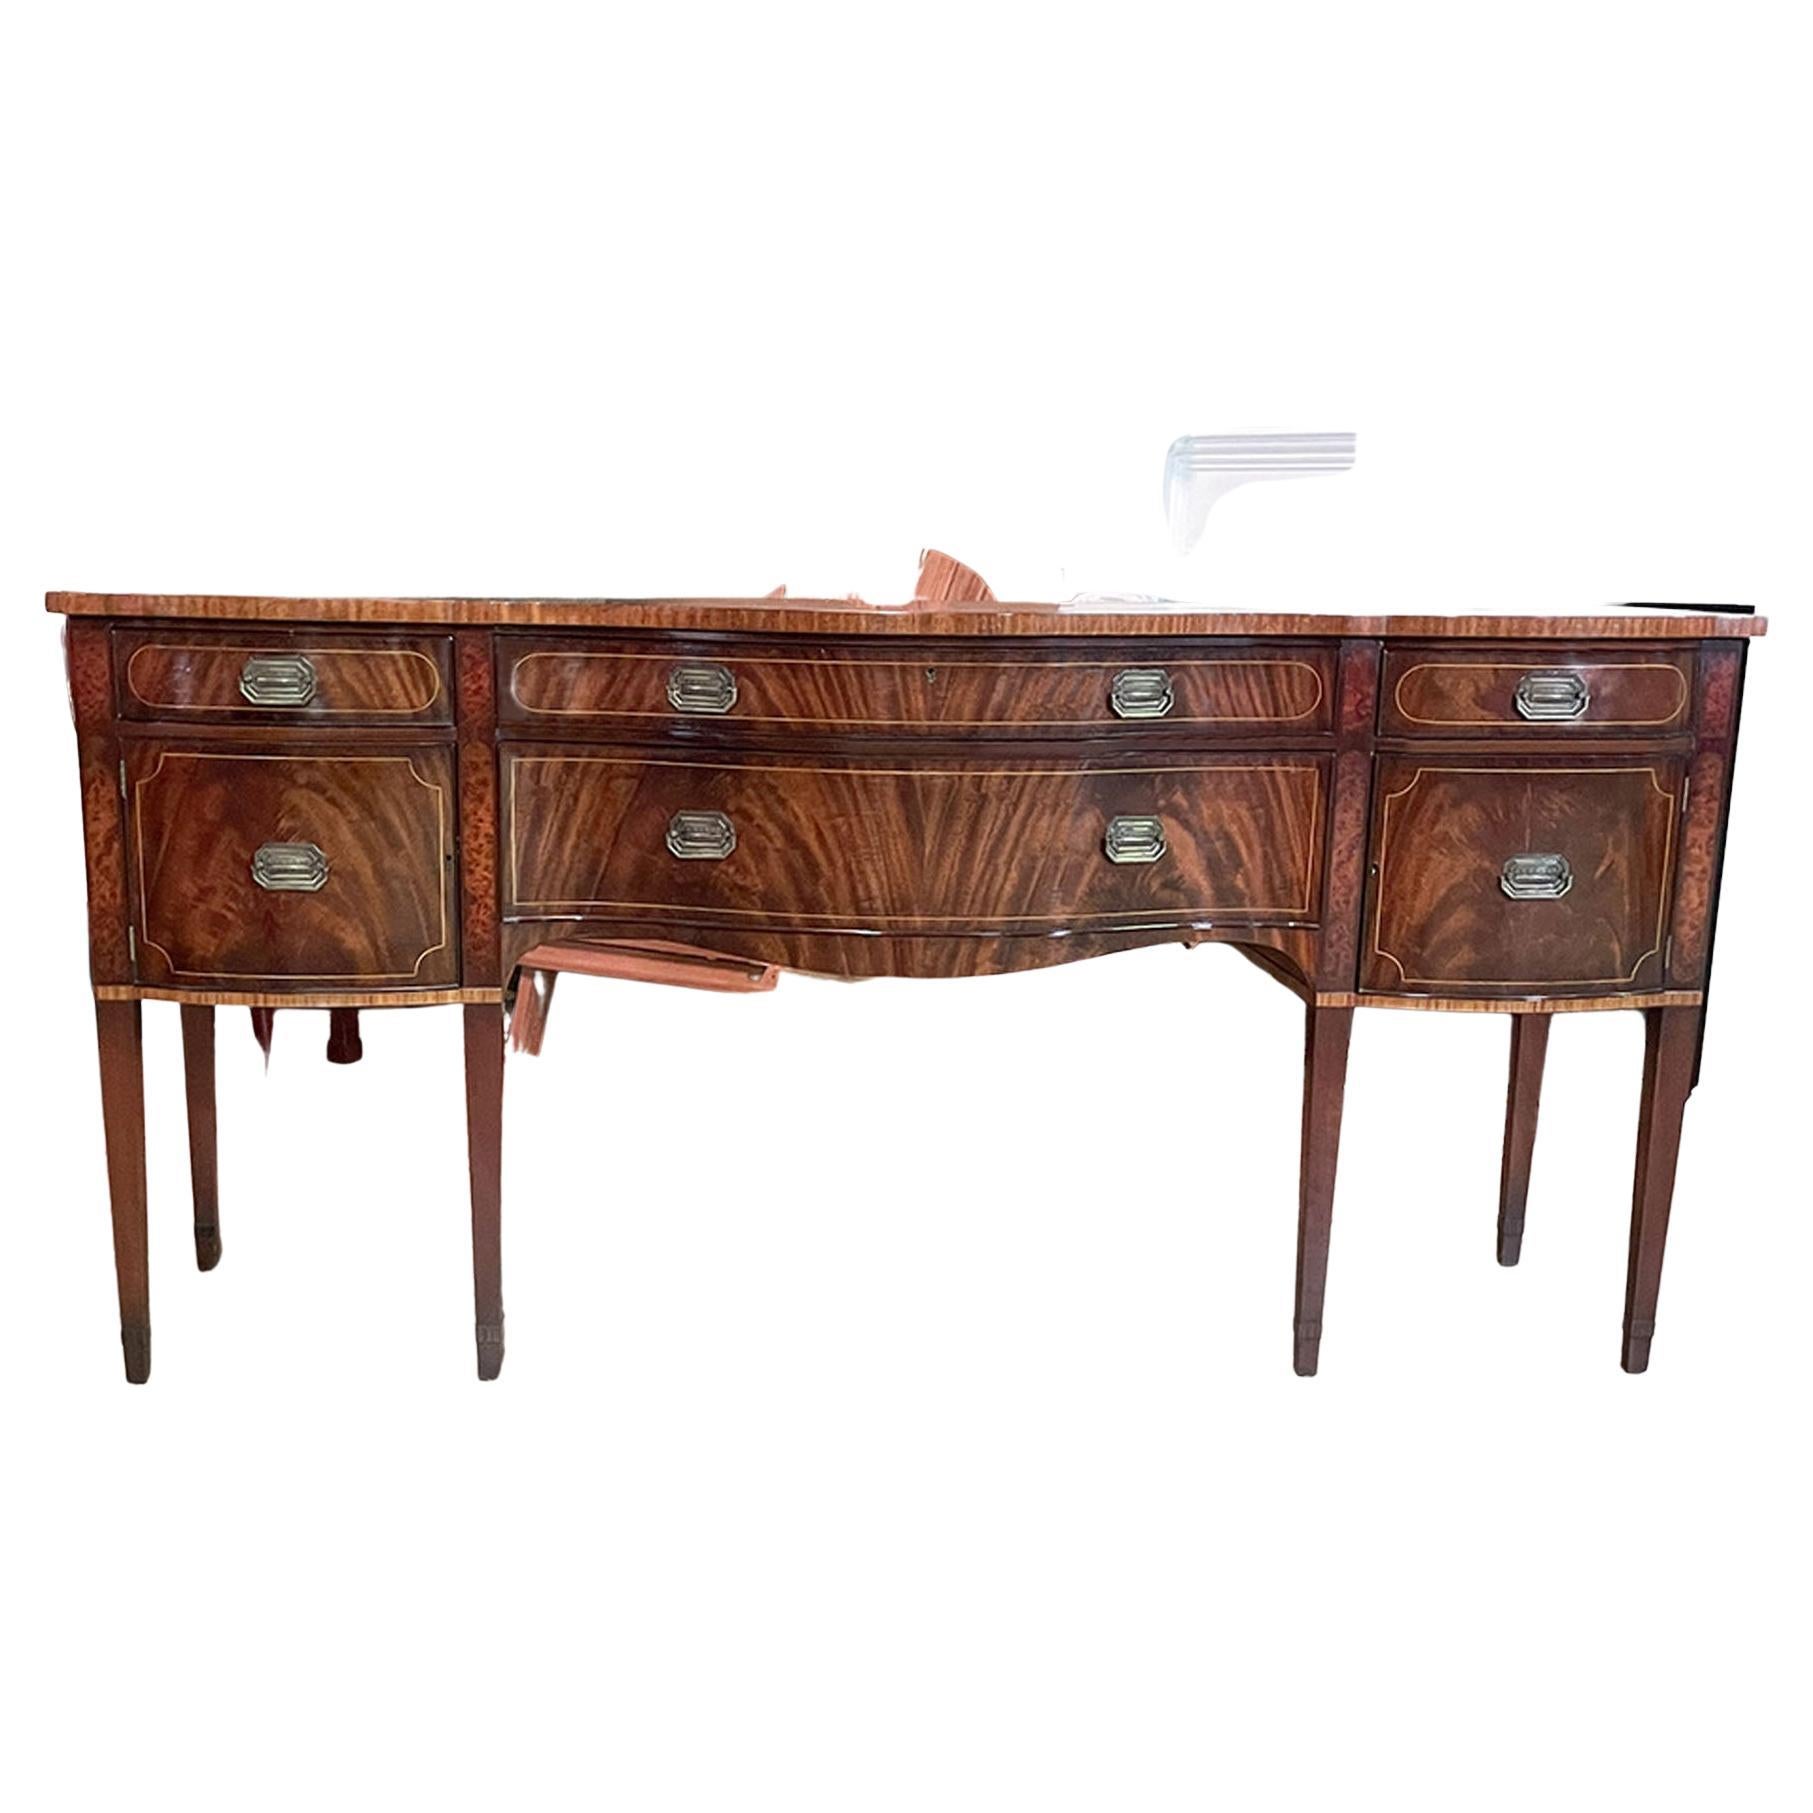 A Vintage Schmieg and Kotzian sideboard in excellent condition.

Both elegant and incredibly detailed this beautiful Vintage Schmieg and Kotzian Sideboard has everything one could ask for as a center point for the dining room. The sideboard has a